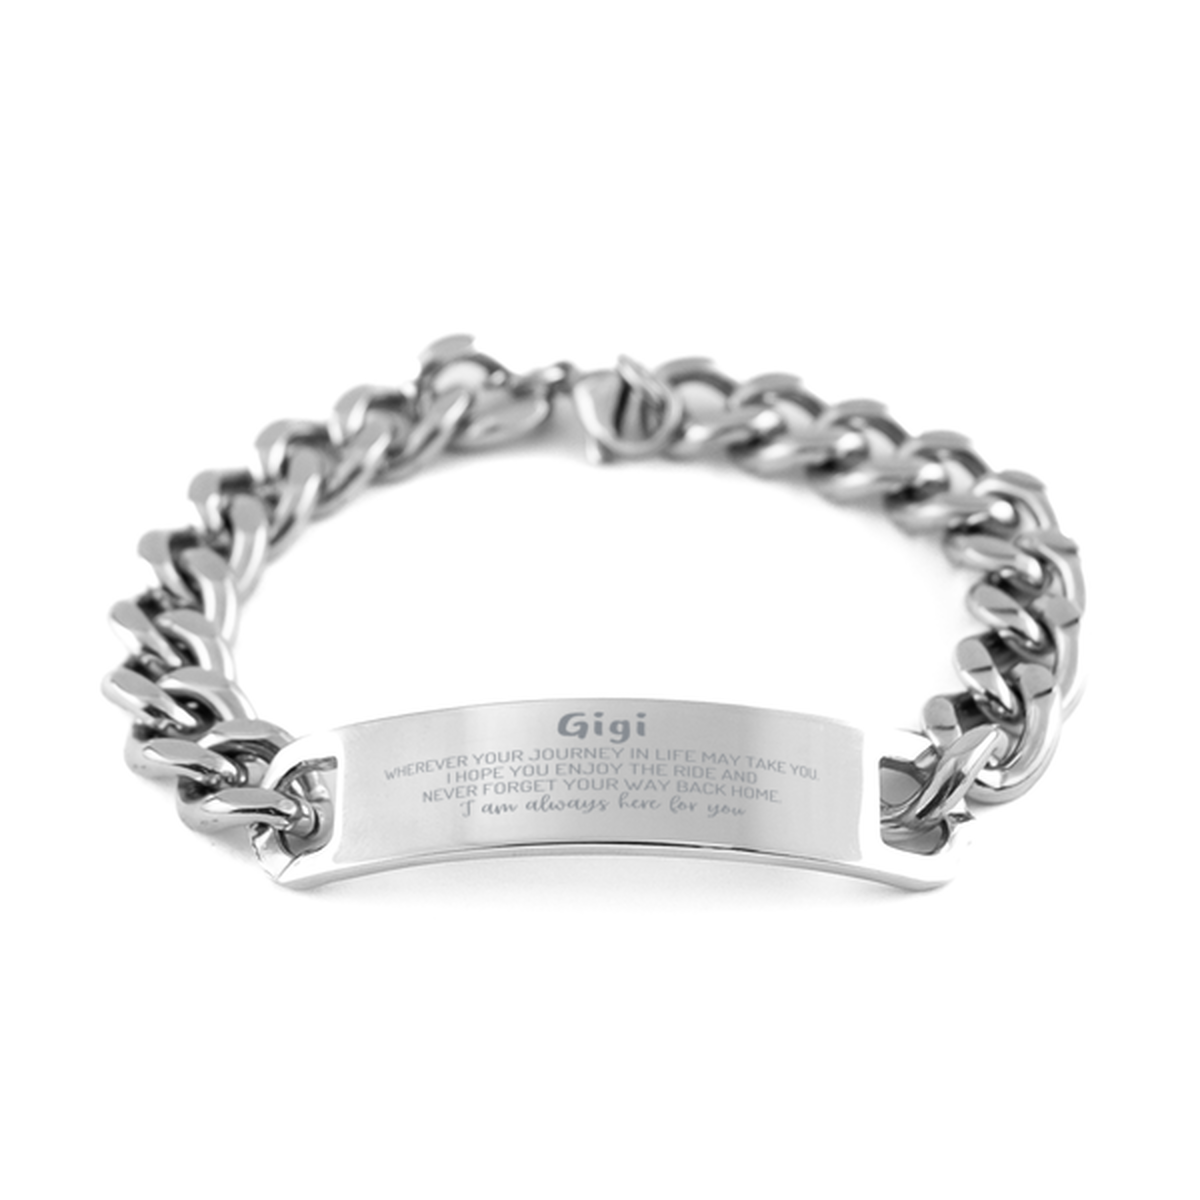 Gigi wherever your journey in life may take you, I am always here for you Gigi Cuban Chain Stainless Steel Bracelet, Awesome Christmas Gifts For Gigi, Gigi Birthday Gifts for Men Women Family Loved One